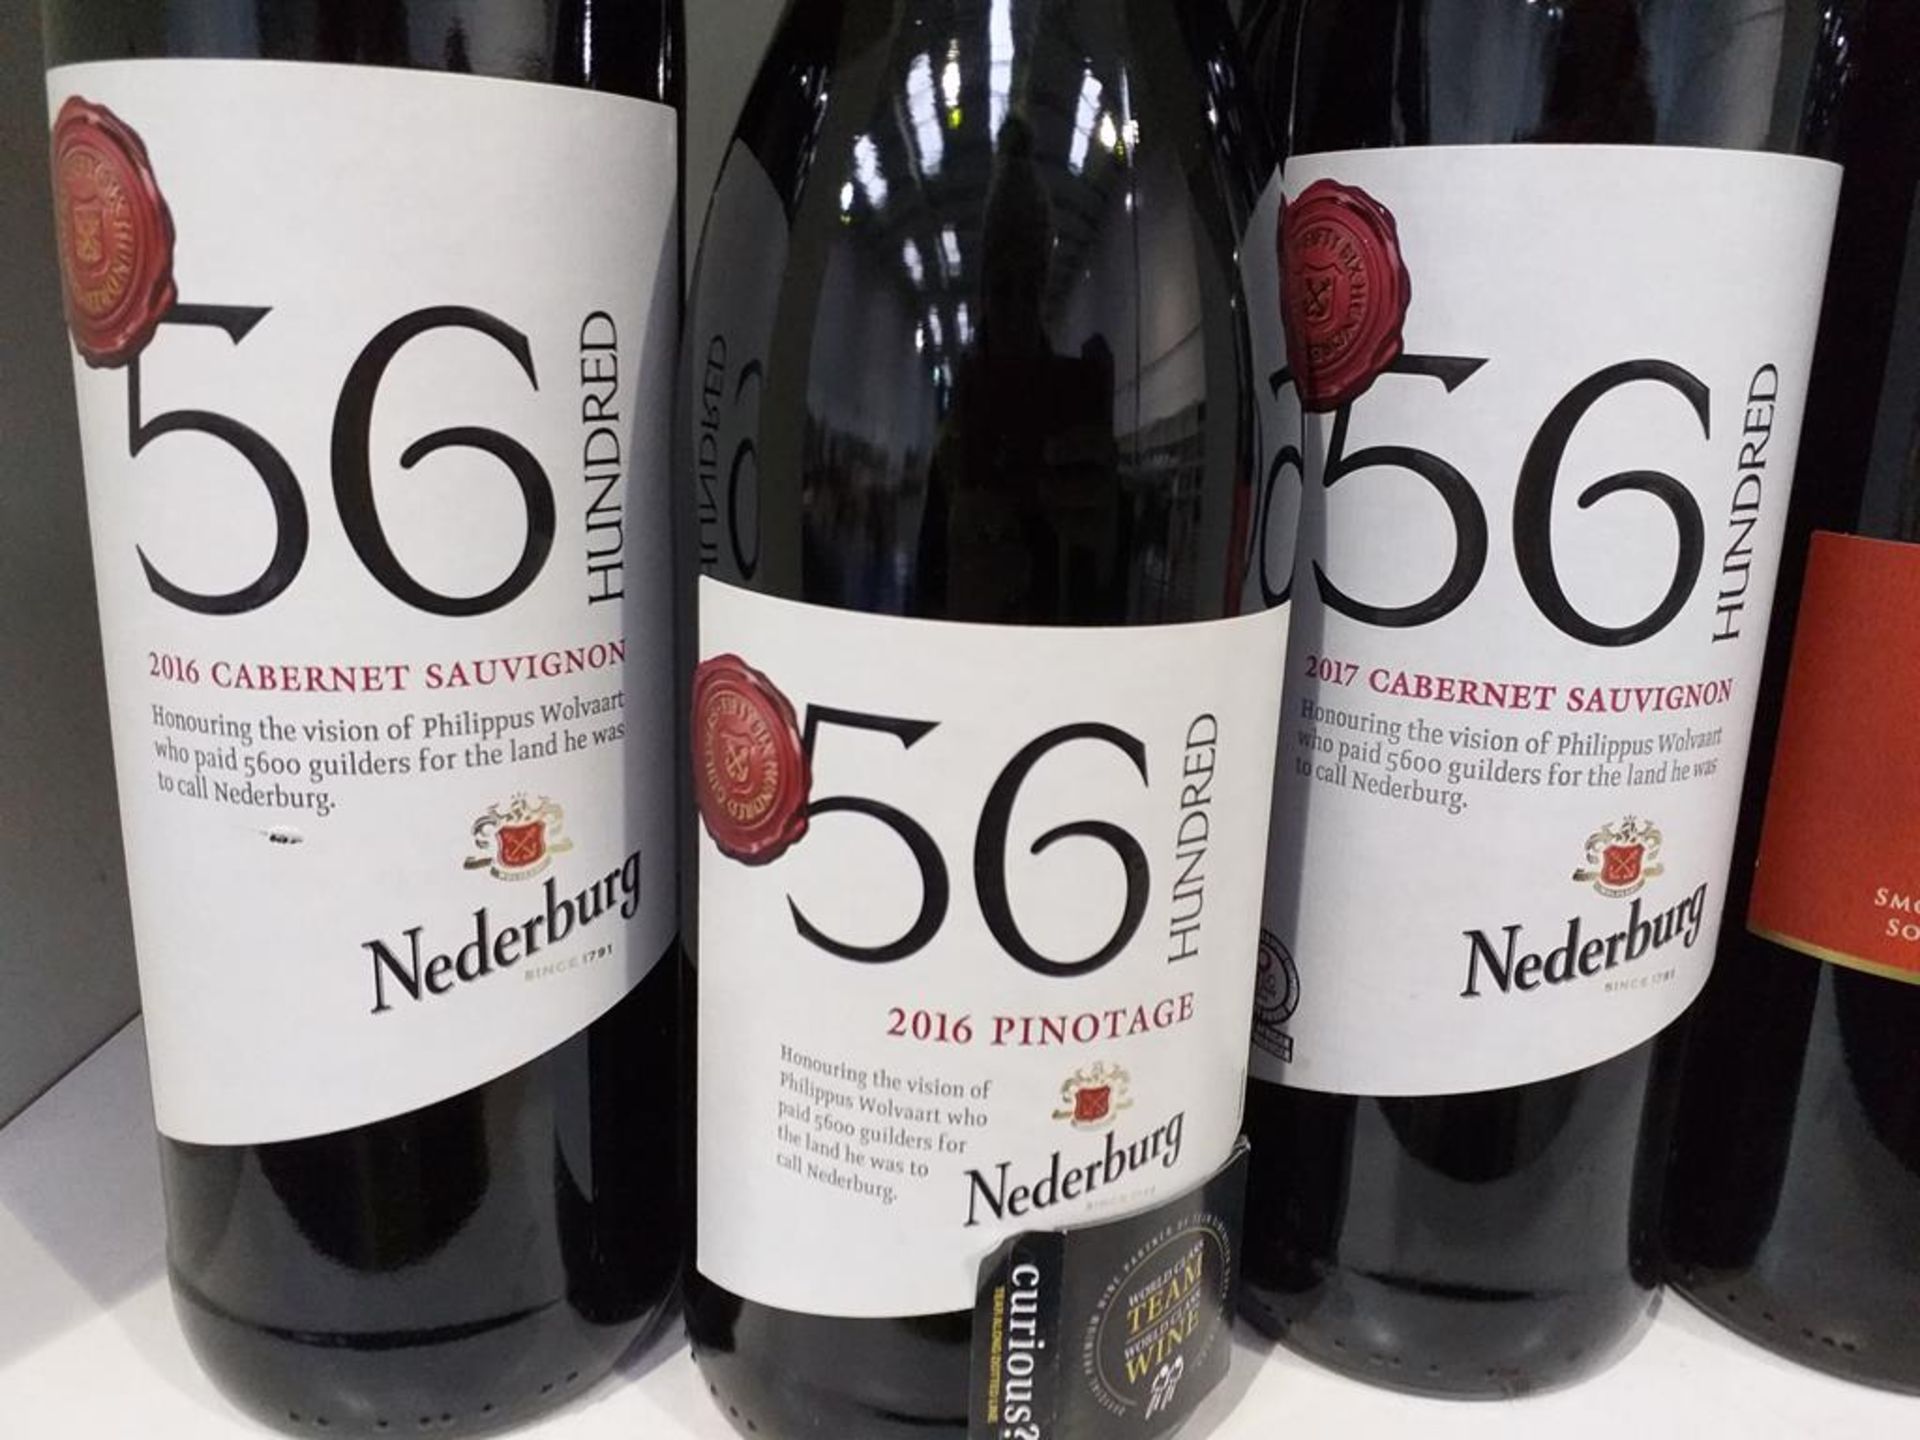 Five bottles of Nederburg '56 Hundred' 2016 Pinotage red wine, three bottles of Nederburg '56 Hundre - Image 2 of 5